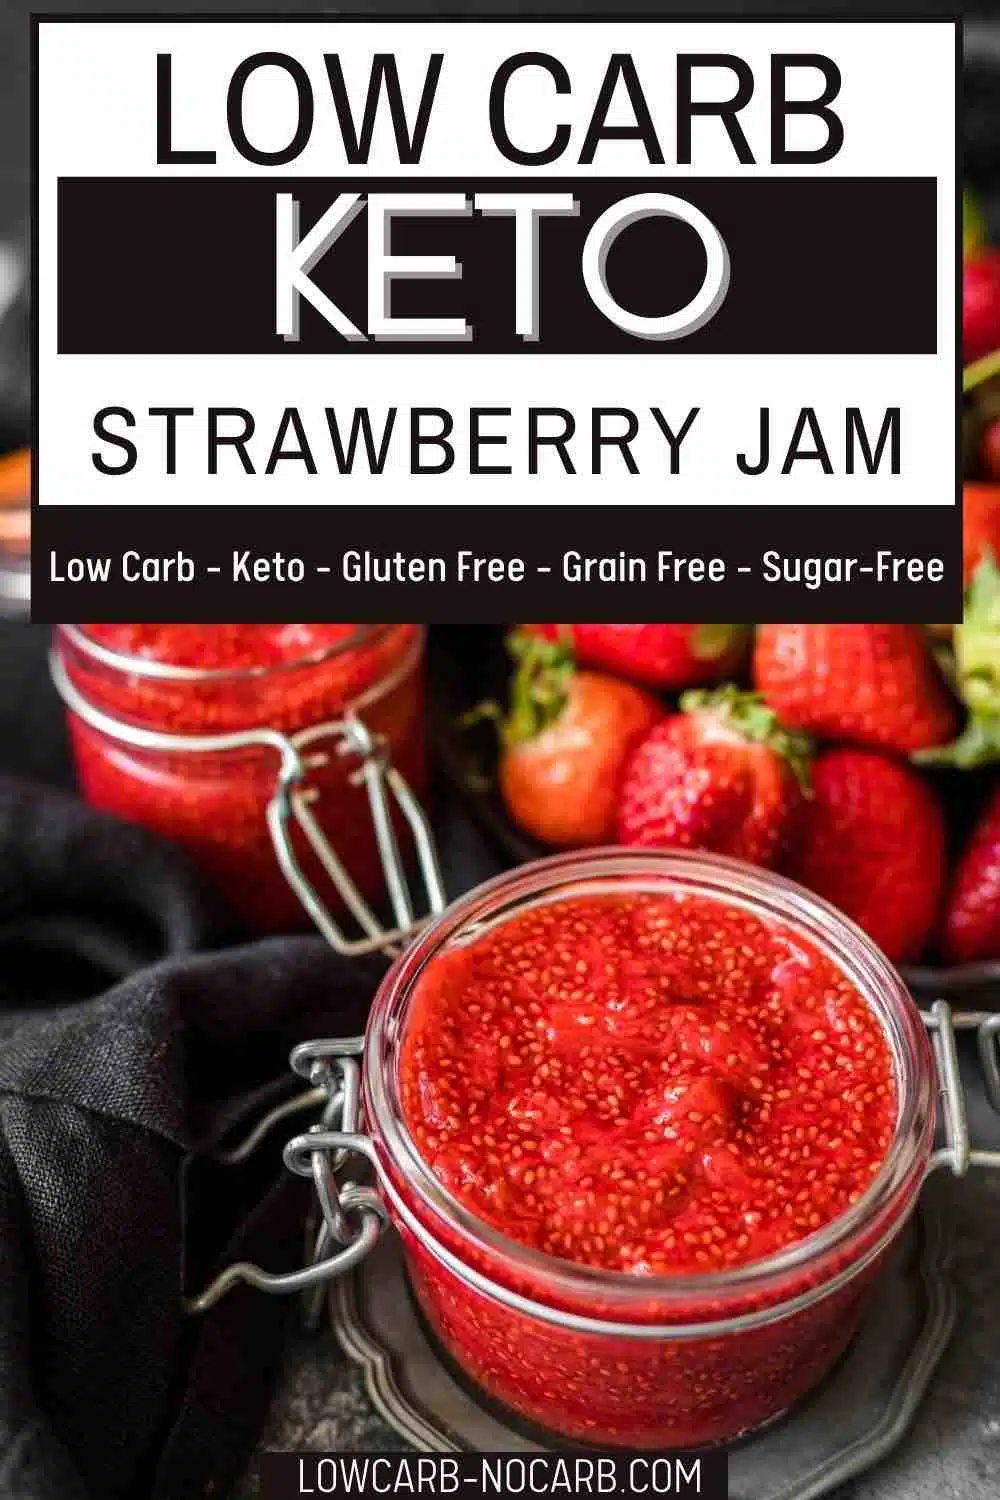 Homemade Strawberry Jam in a glass container with fresh strawberries.